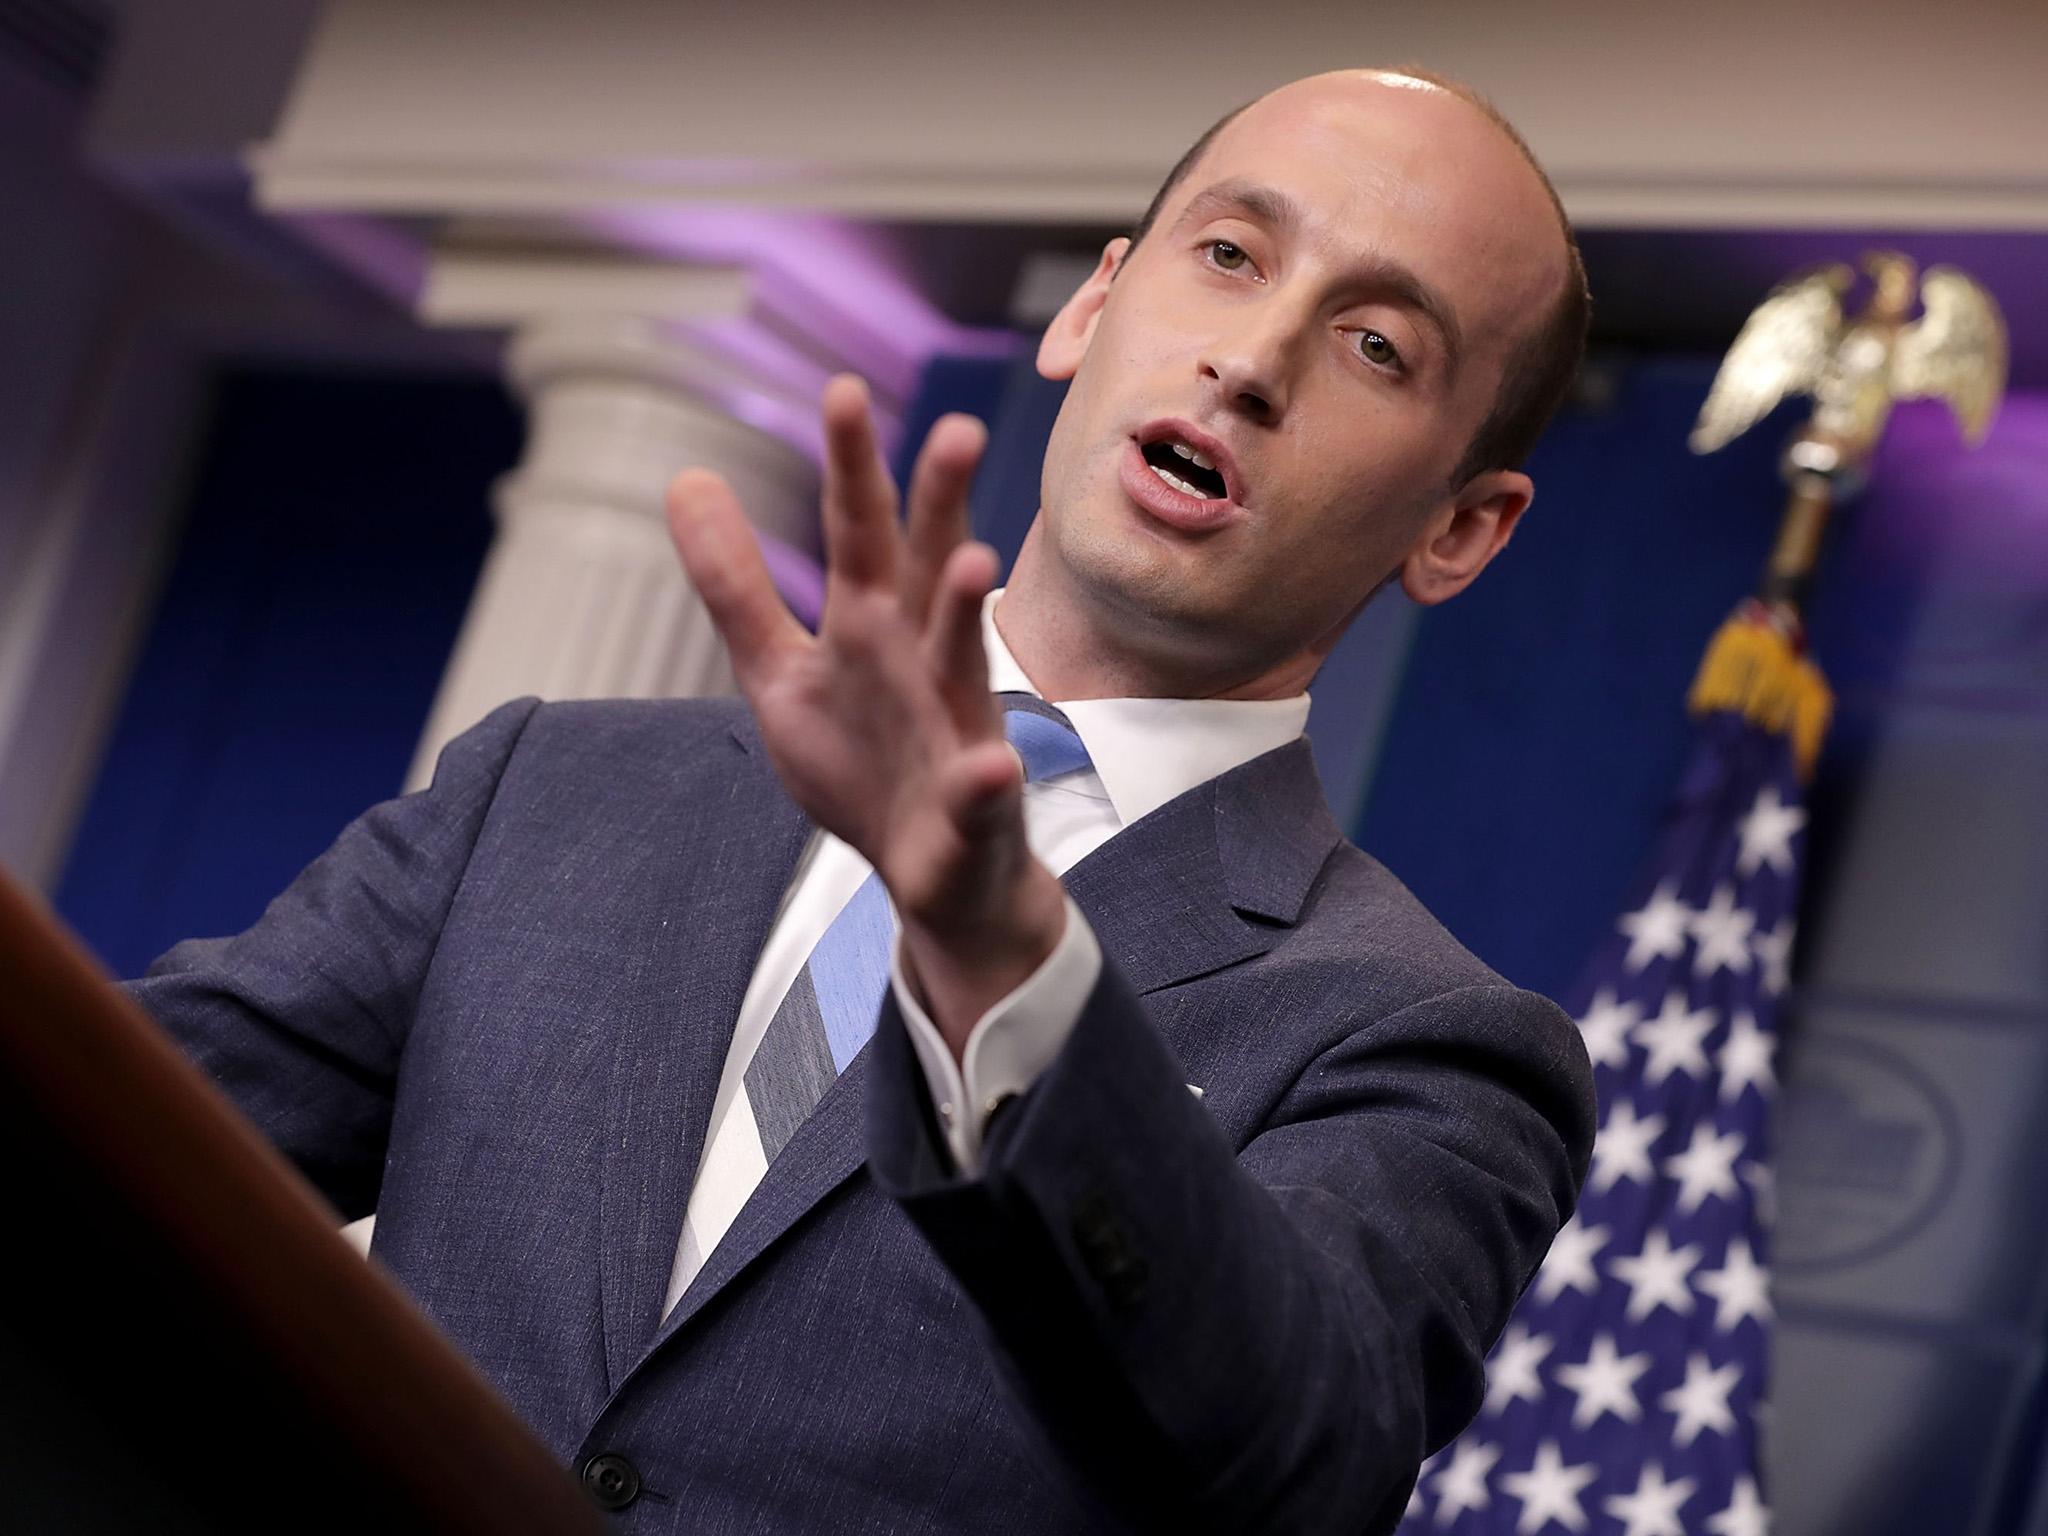 Stephen Miller continued his meal at the restaurant after the comment, according to the report